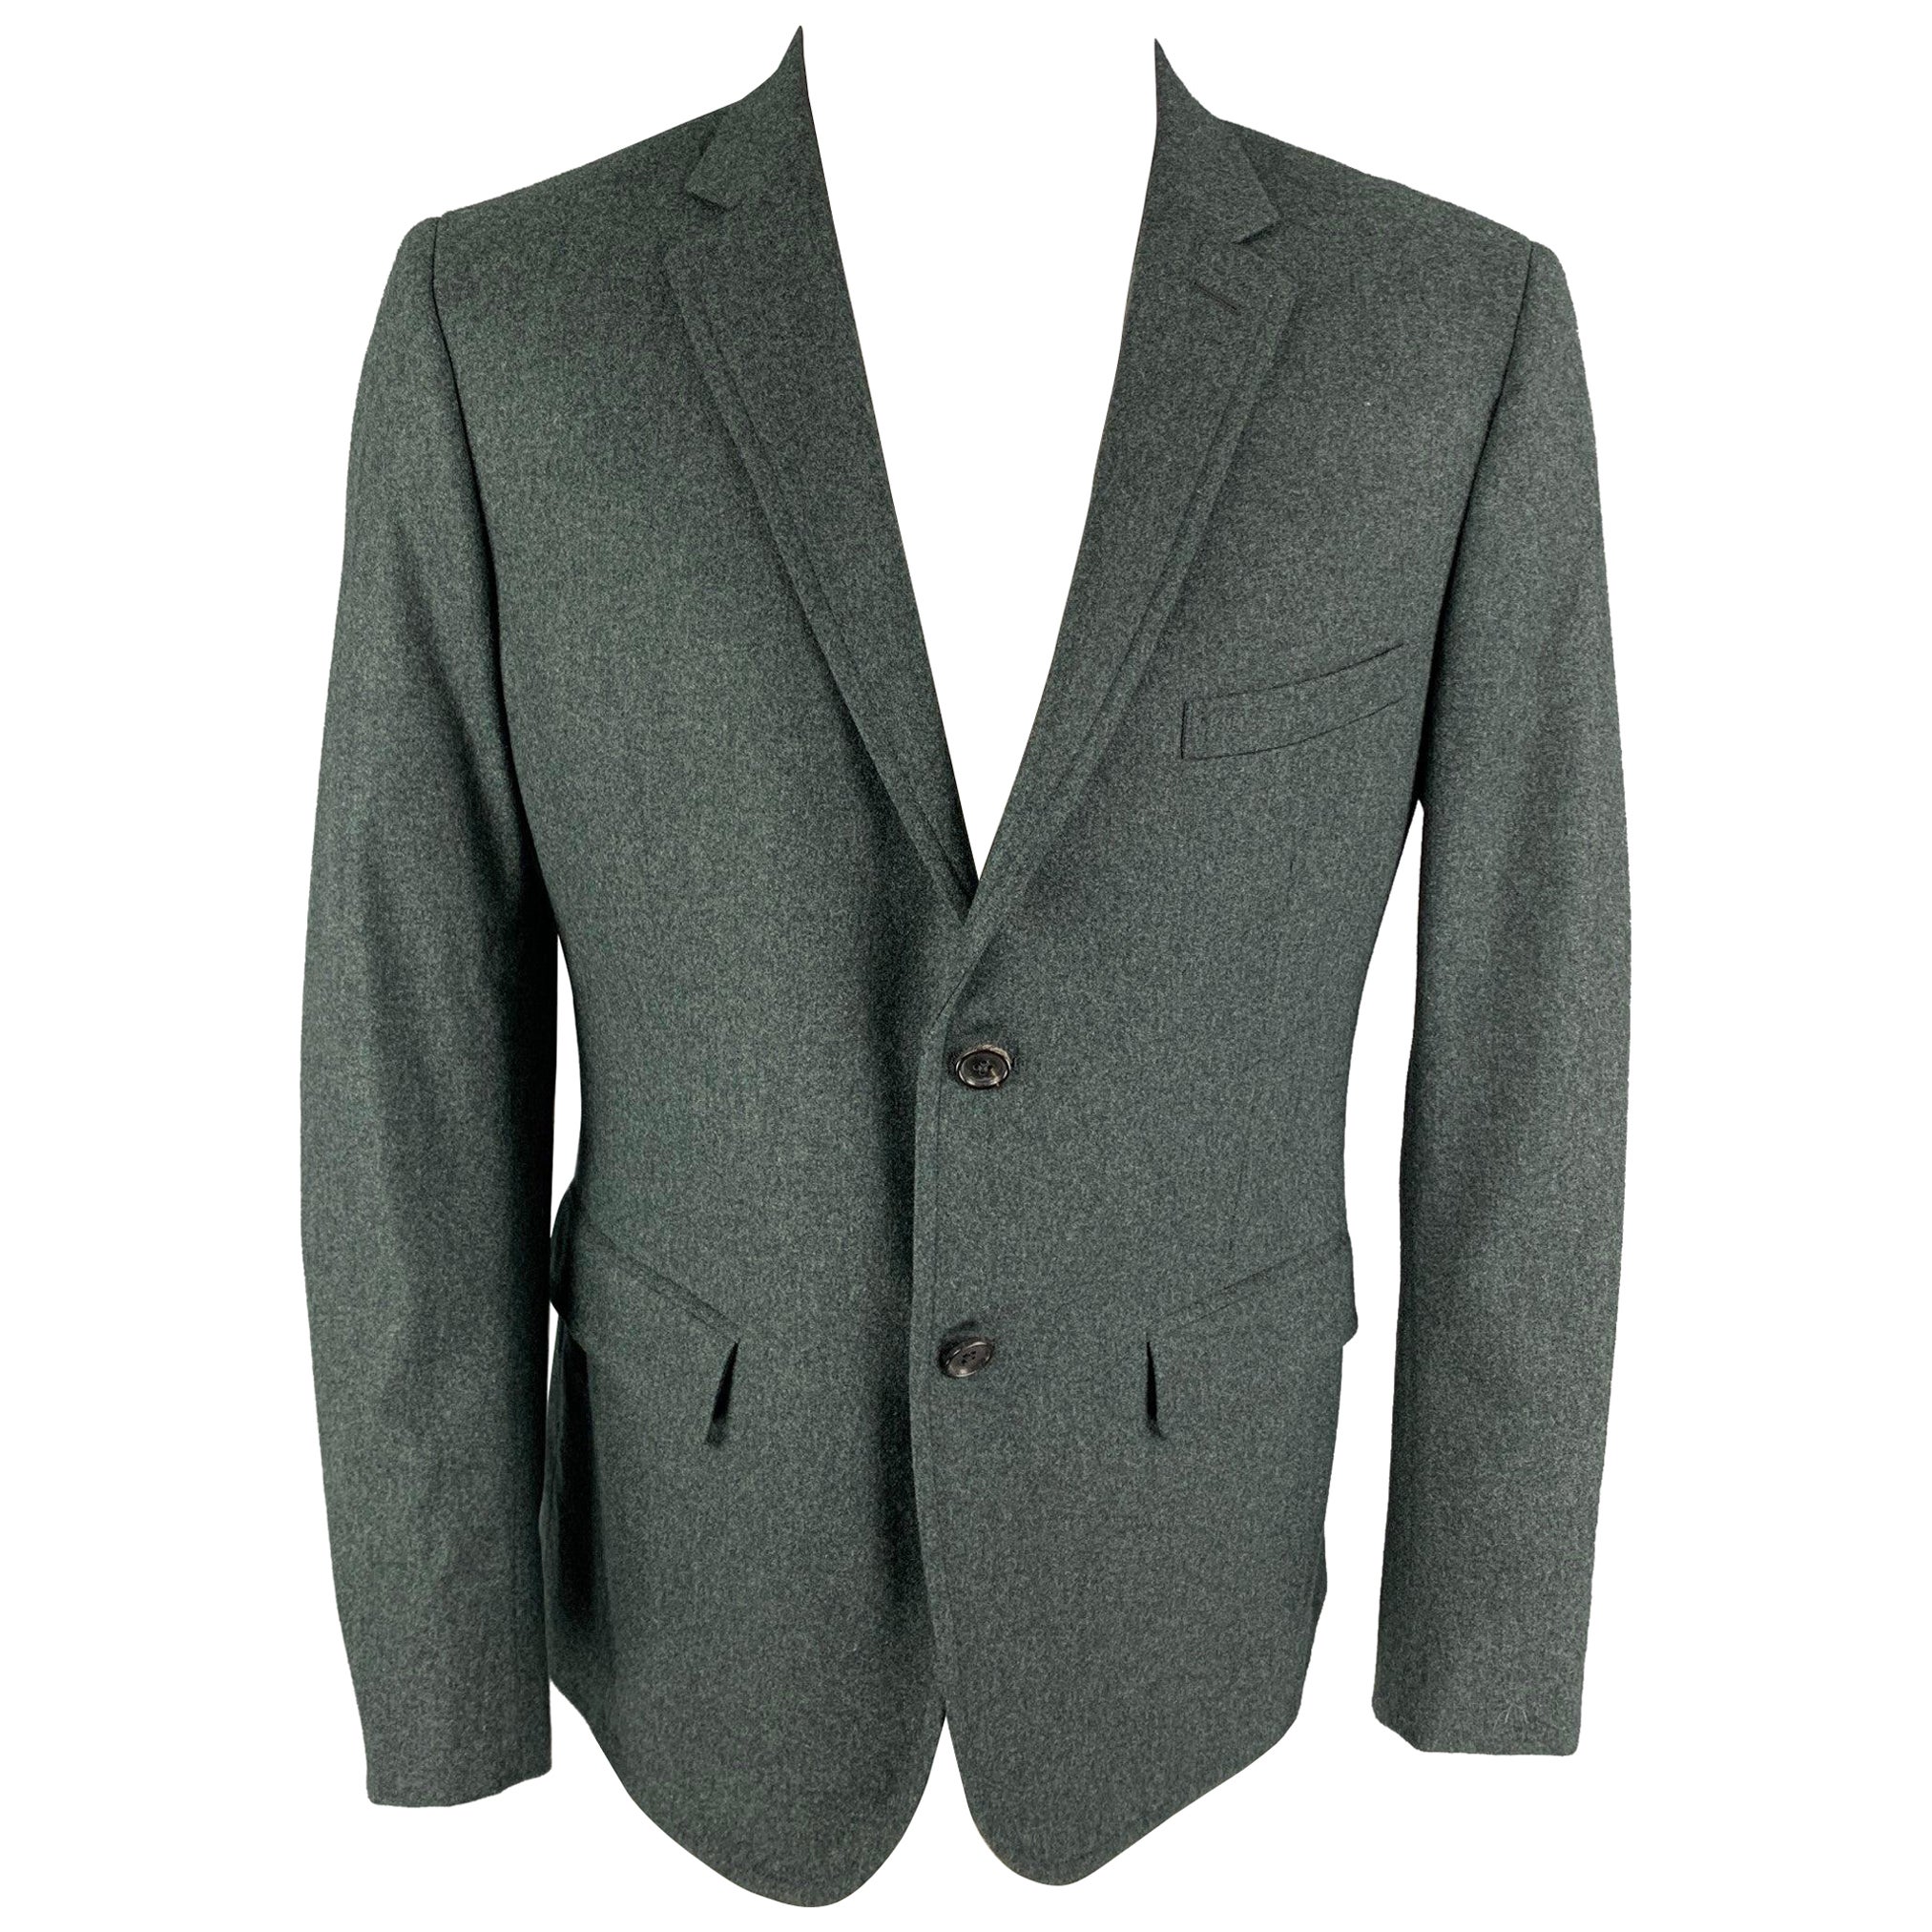 BAND OF OUTSIDERS Size 42 Green Wool Notch Lapel Sport Coat For Sale